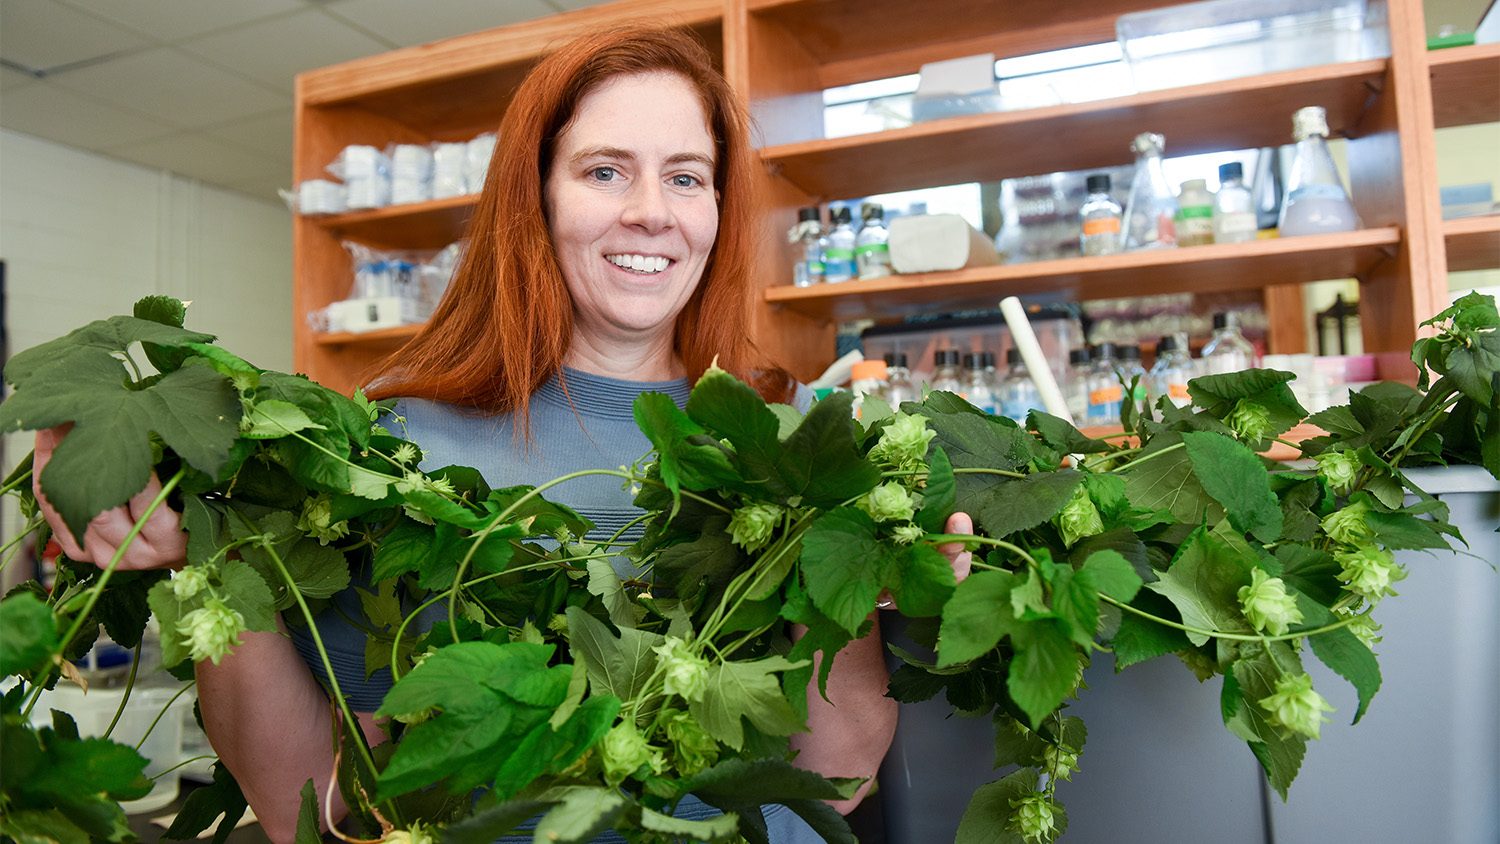 NC State's Dr. Colleen Doherty studies the circadian rhythm of plants. Among the projects she's involved with: finding ways to make hops plants more suitable for North Carolina day length.